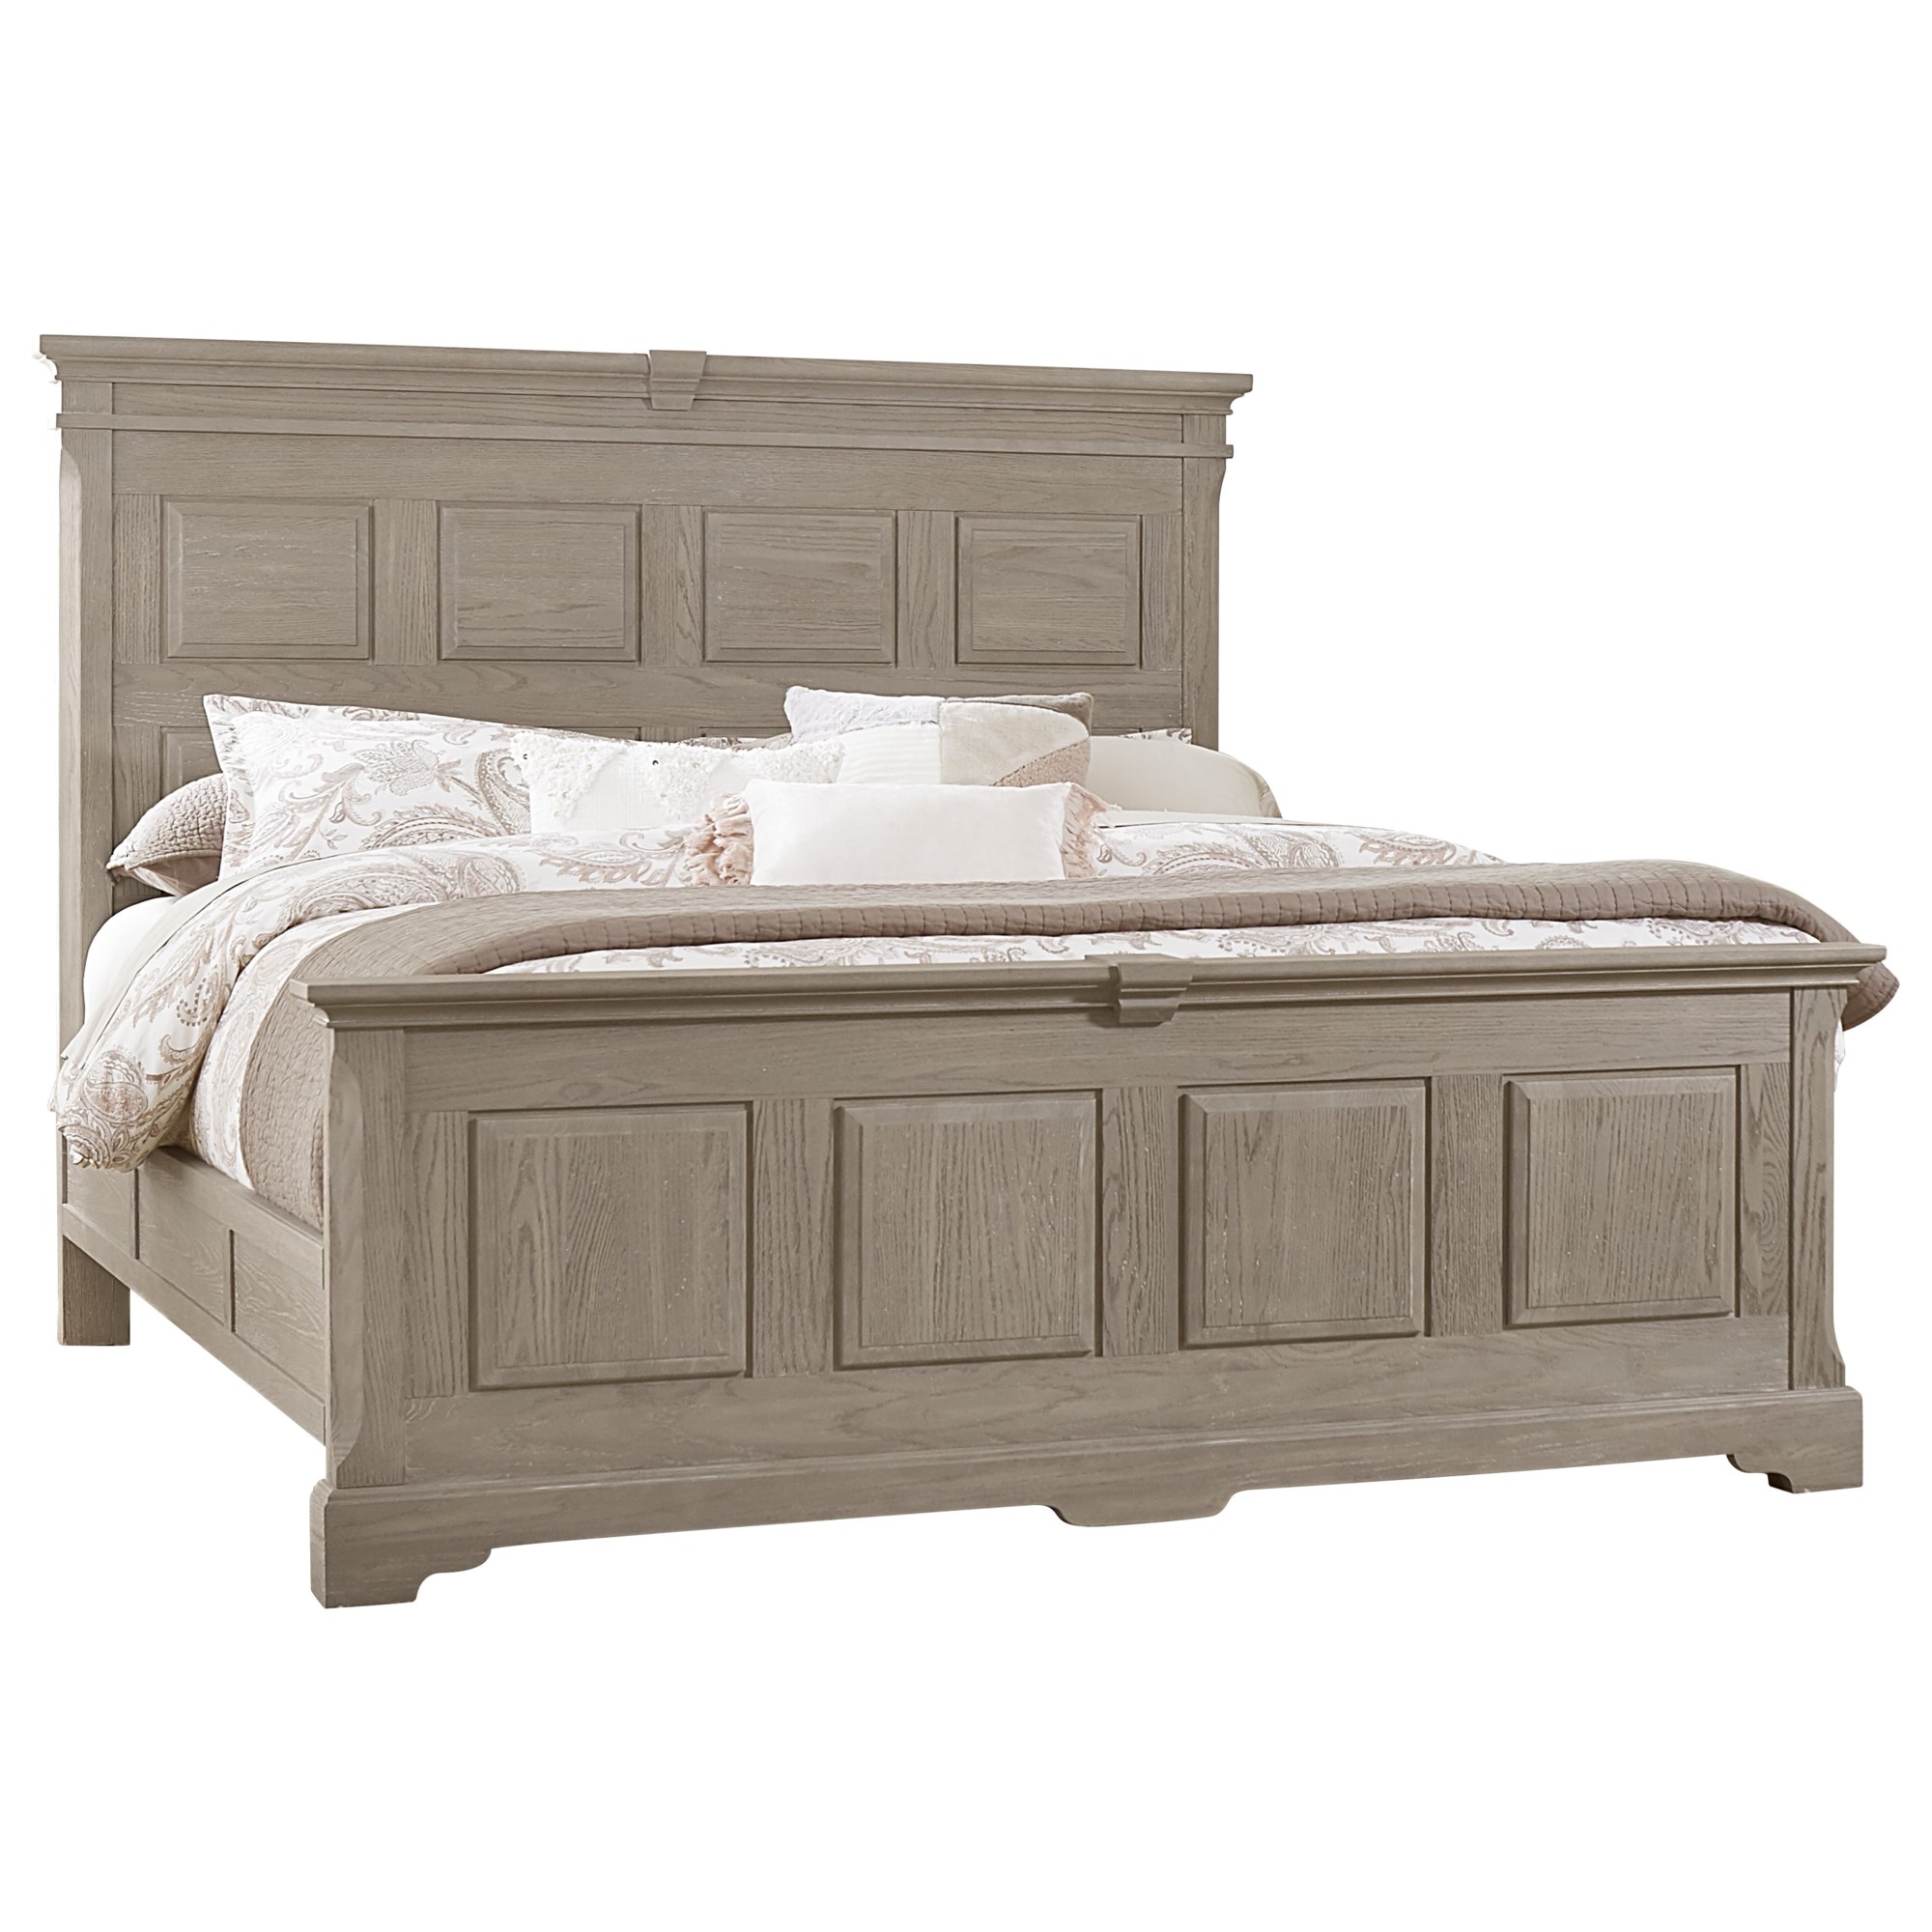 Artisan & Post Heritage 114-559-955-822 Traditional Queen Mansion Bed with  Decorative Side Rails, Belfort Furniture